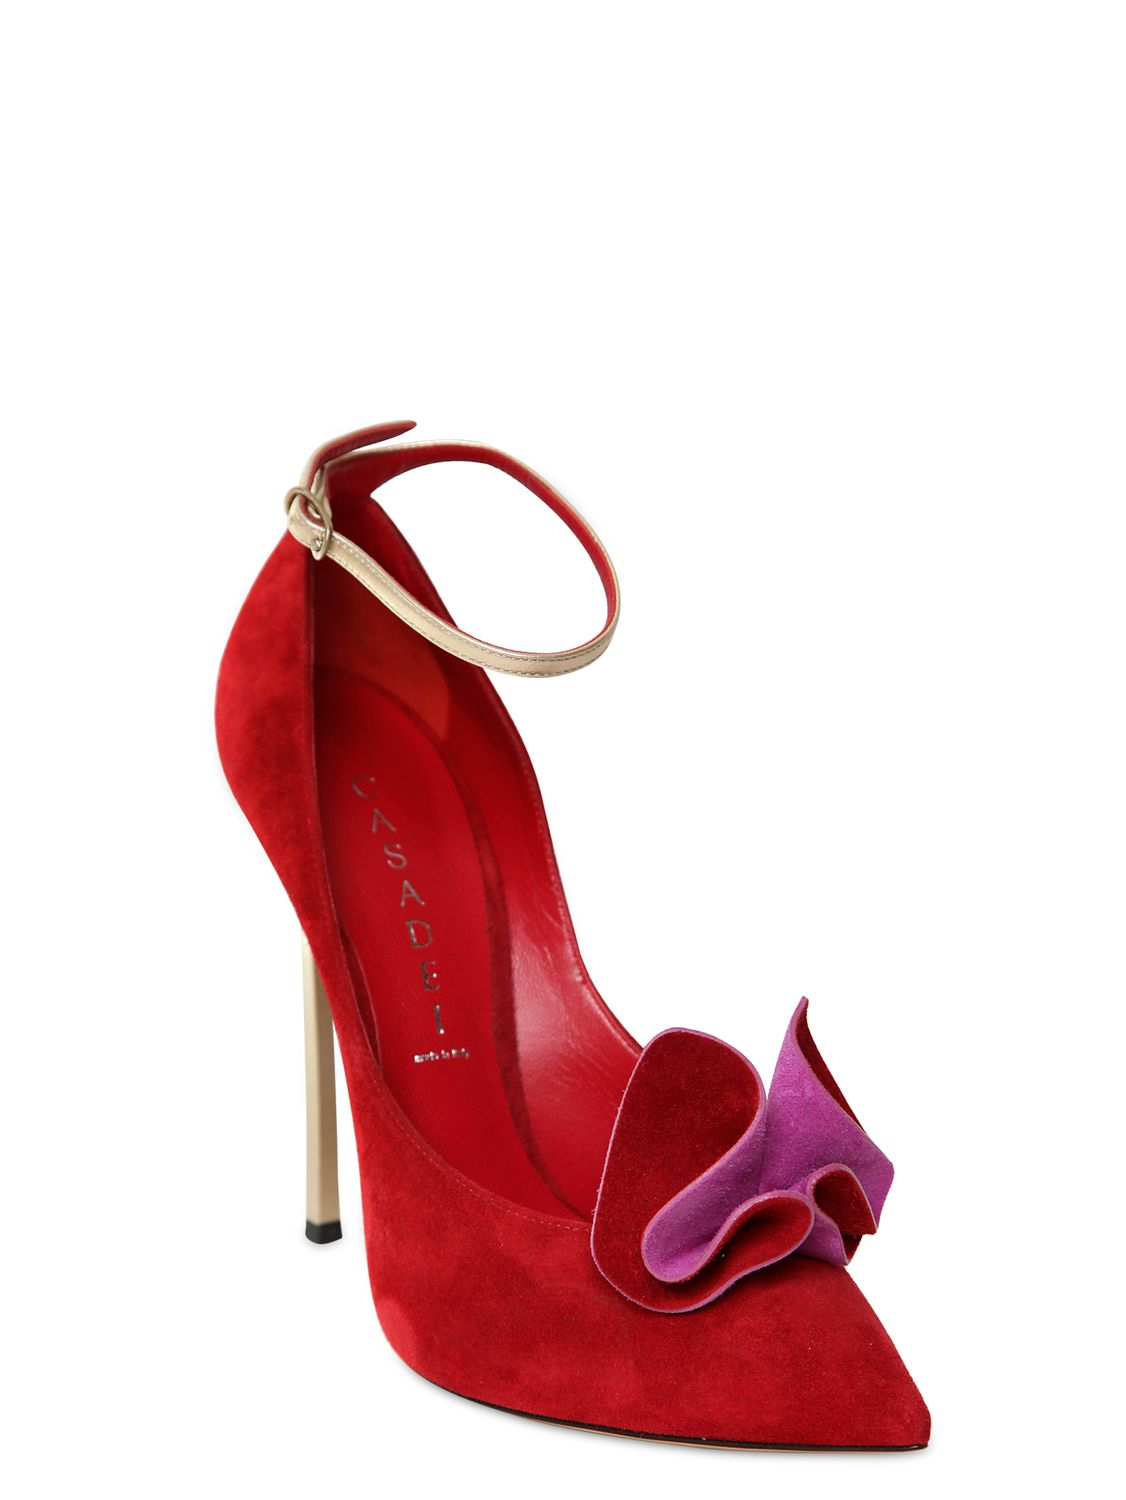 Lyst - Casadei 110mm Pointed Suede Pumps with Bow in Red